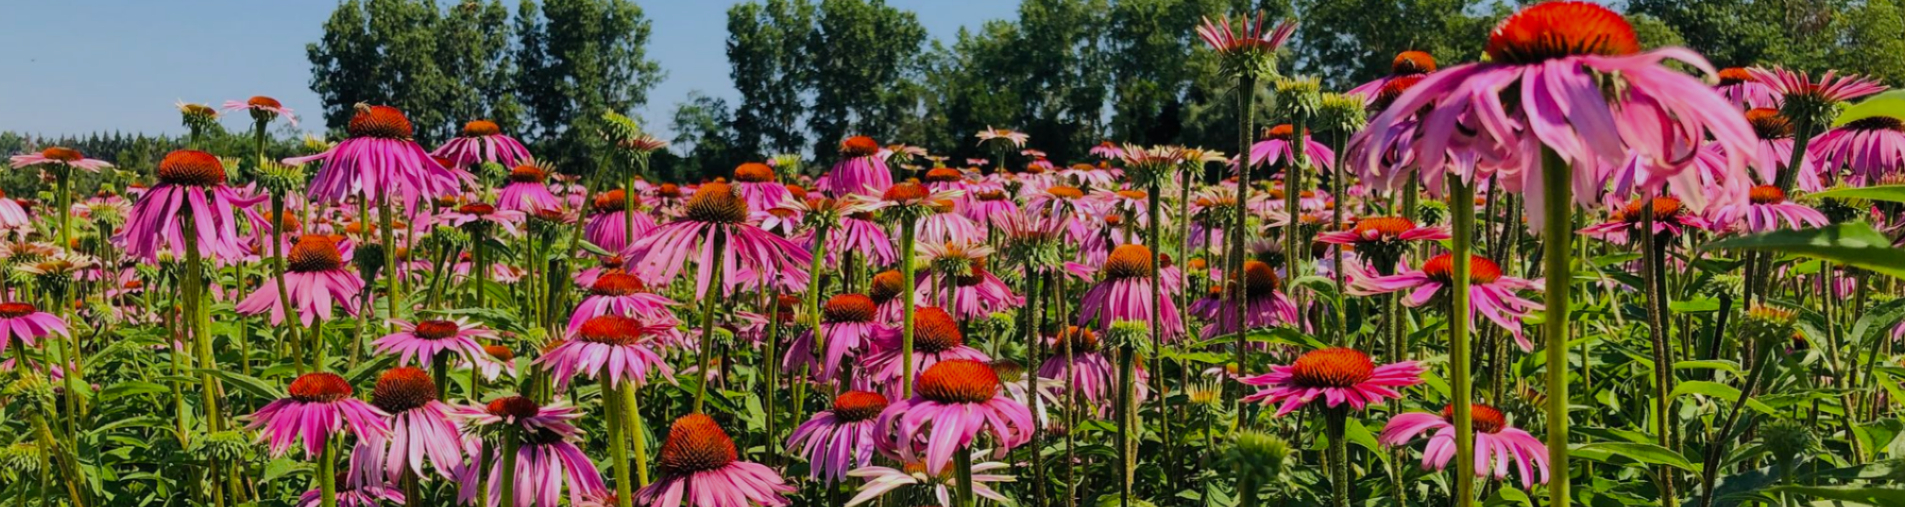 Echinacea: an indispensable kickstart for heading back to work!